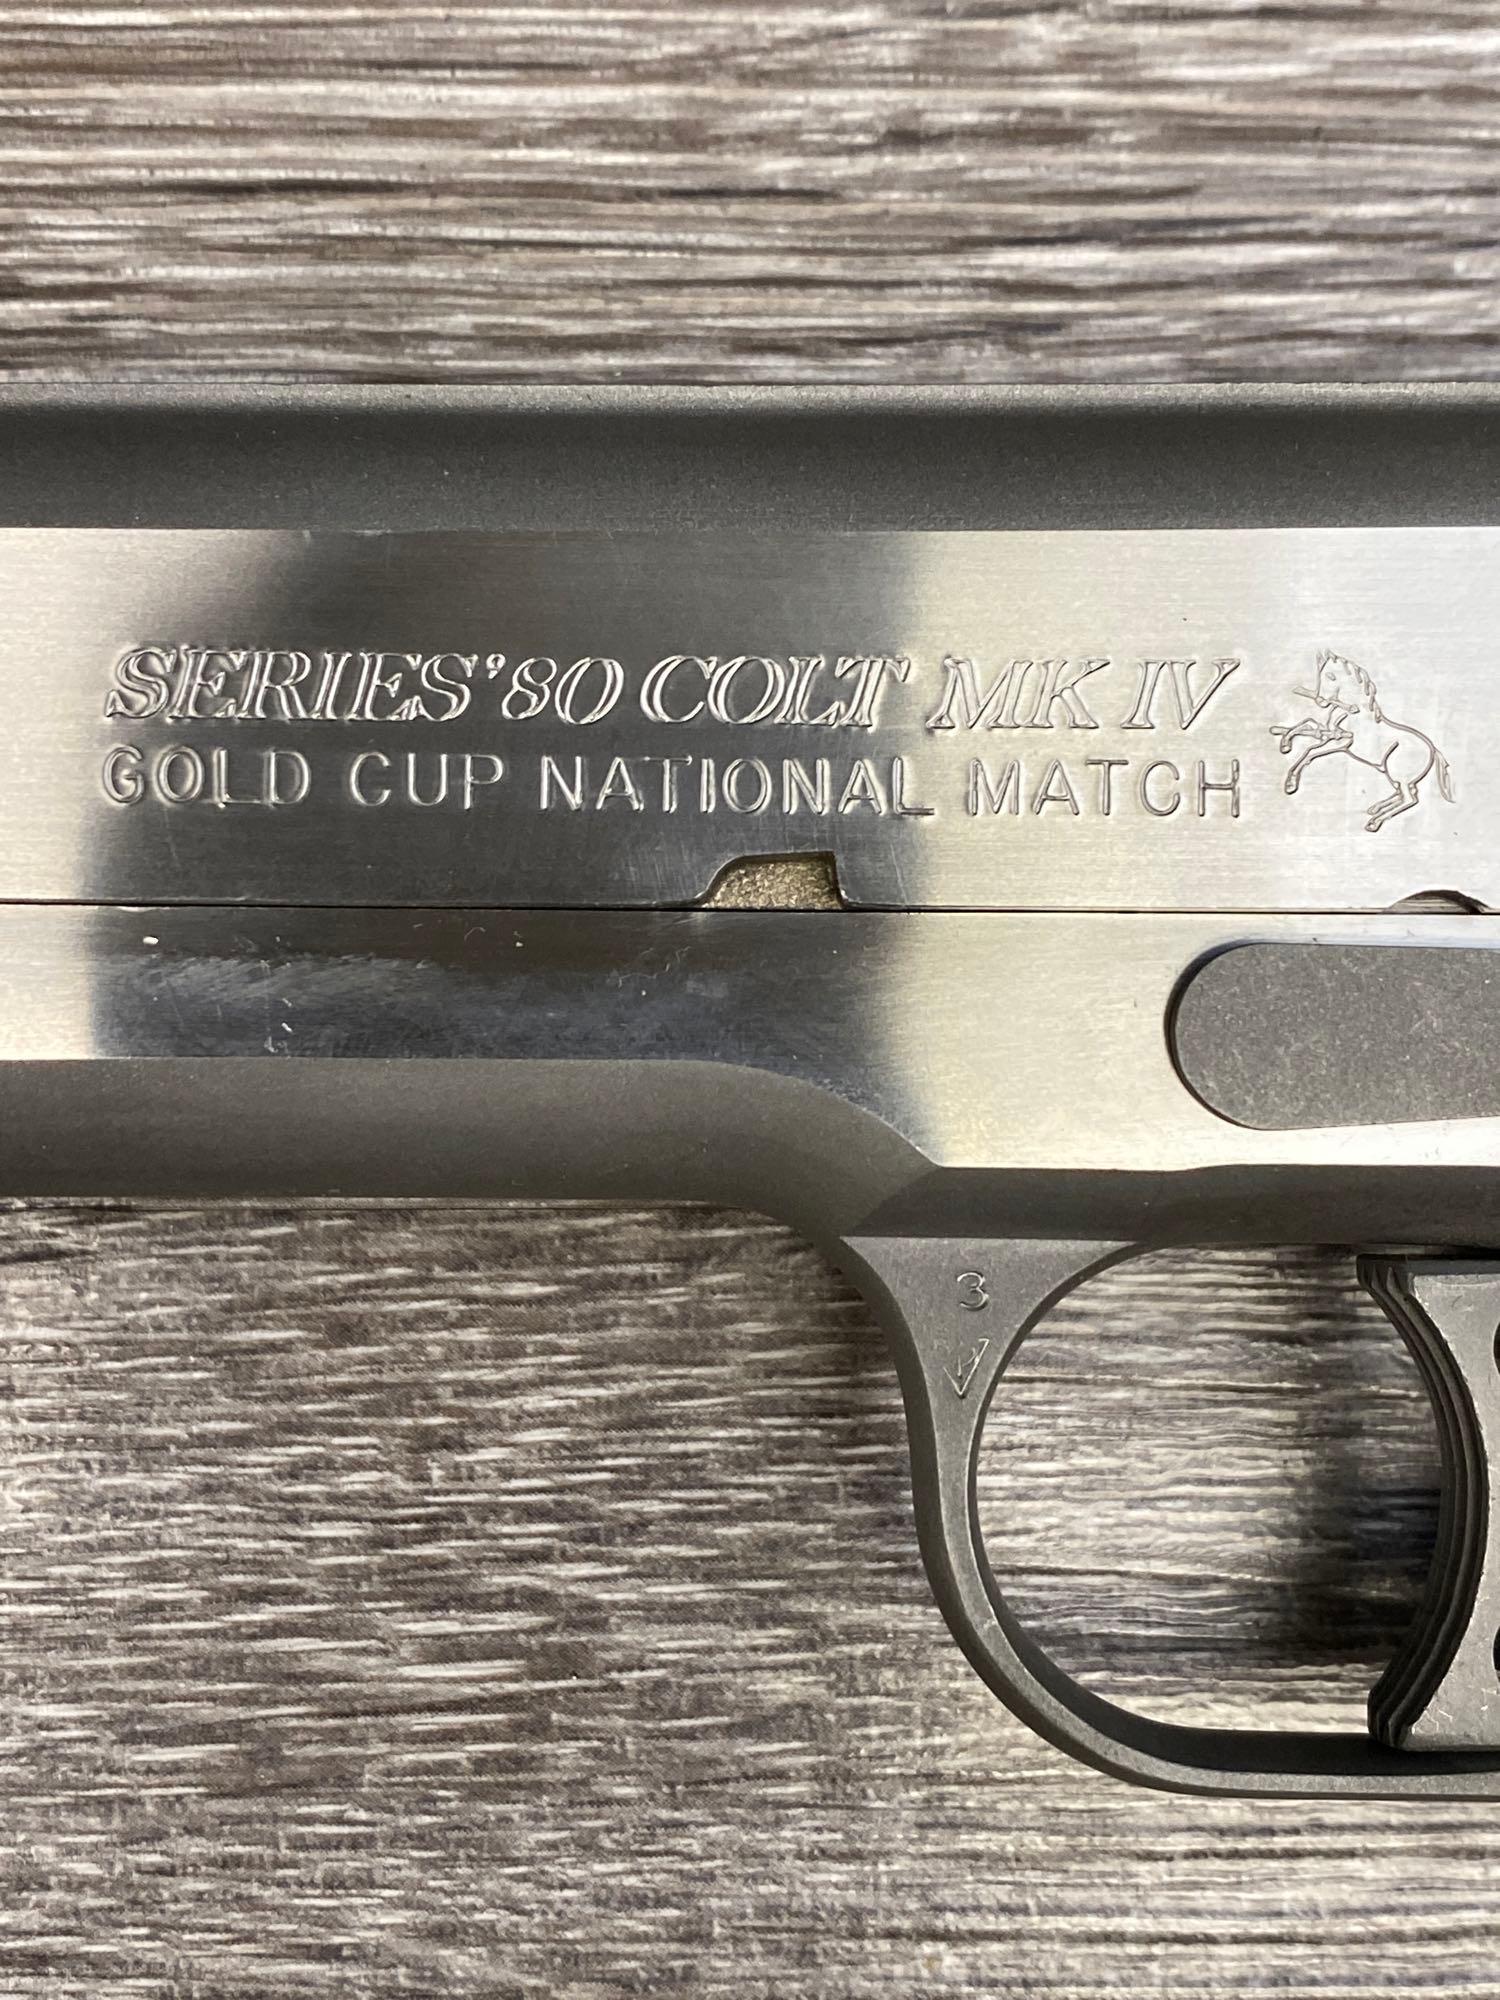 BOXED STAINLESS STEEL COLT GOLD CUP NATIONAL MATCH .45 SEMI-AUTO PISTOL